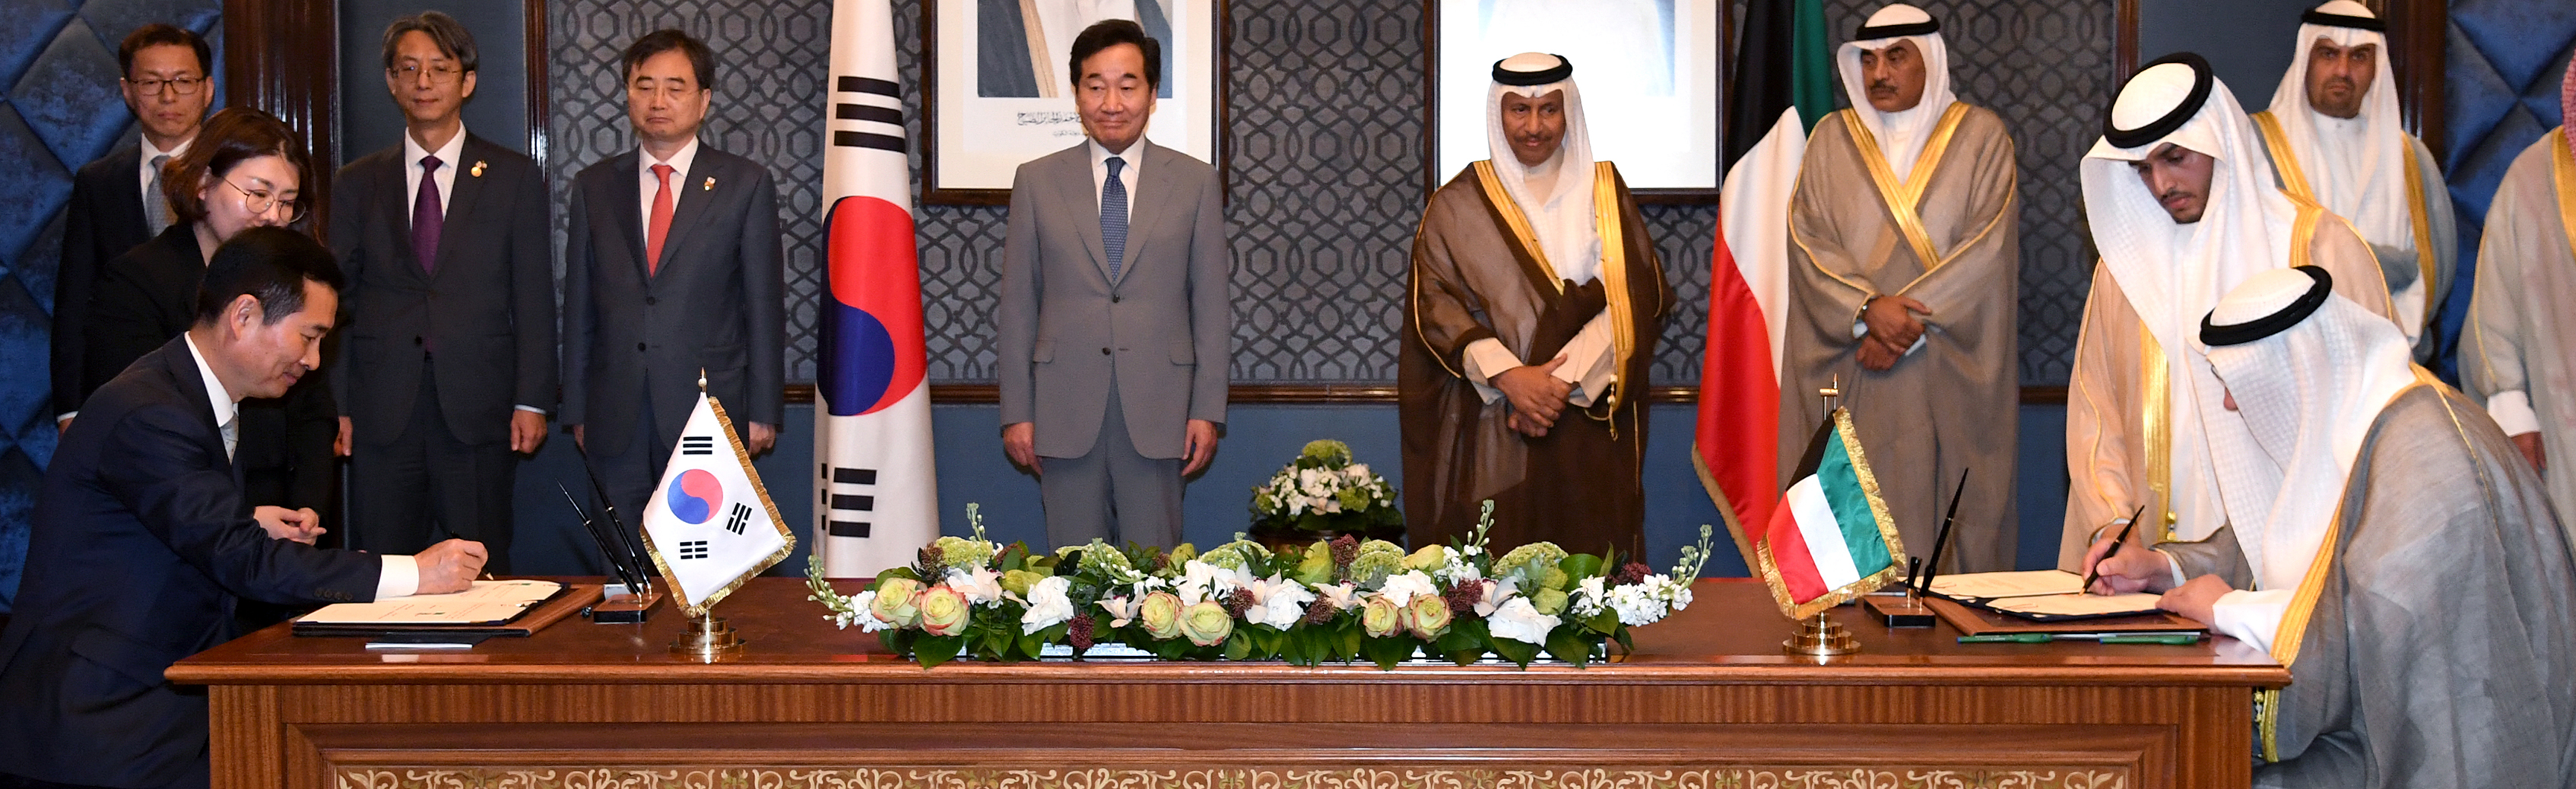 ACRC-Kuwait Anti-Corruption Authority signed an MOU for anti-corruption cooperation